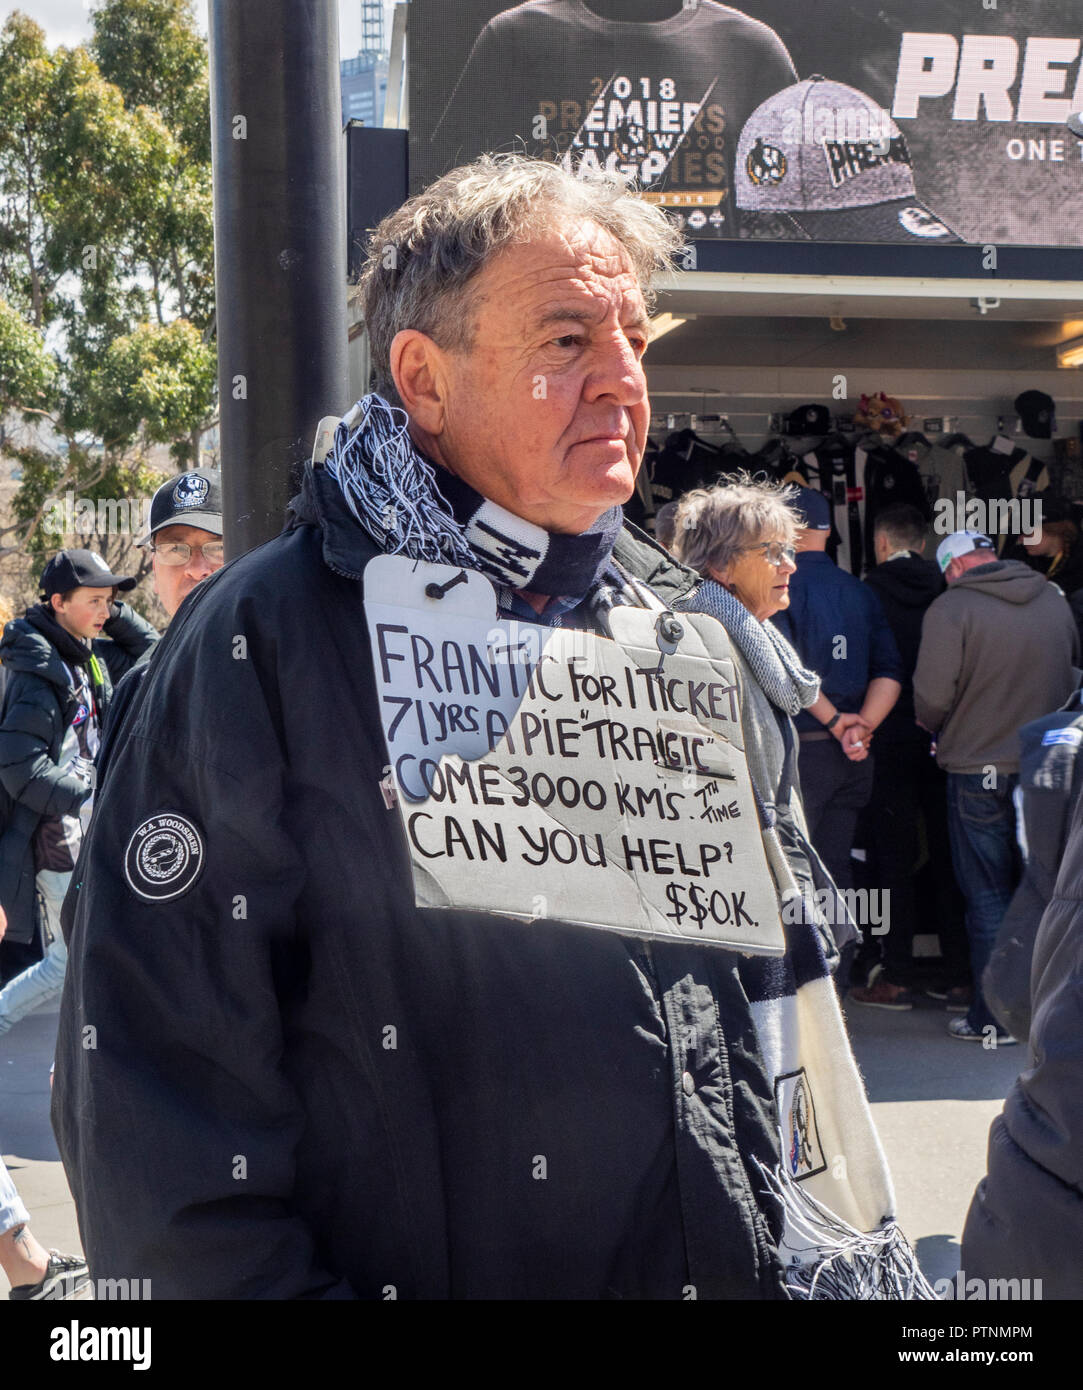 Collingwood Football Club fan and supporter with a sign wanting to buy a ticket to the 2018 AFL Grand Final at MCG, Melbourne Victoria Australia. Stock Photo